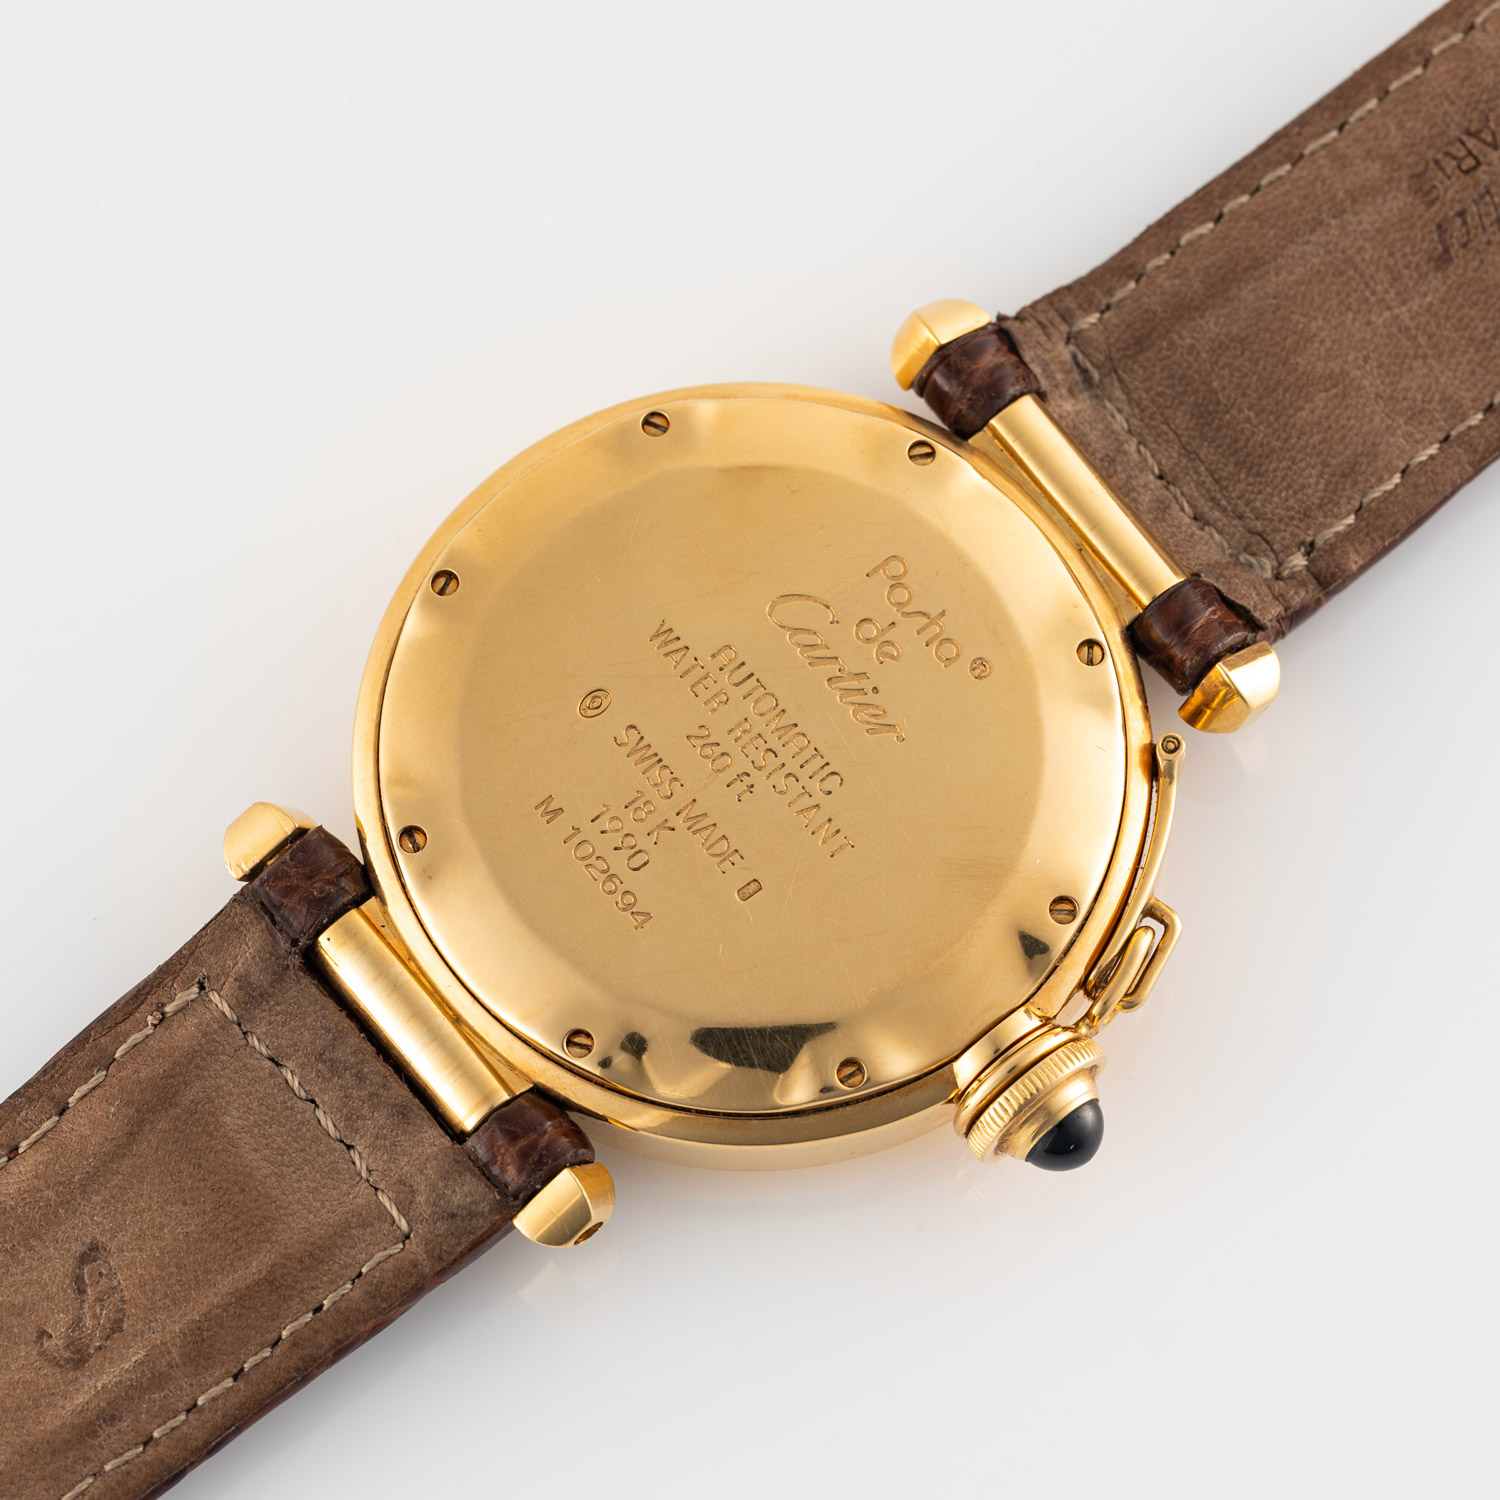 A GENTLEMAN'S SIZE 18K SOLID YELLOW GOLD CARTIER PASHA AUTOMATIC WRIST WATCH CIRCA 1990s, REF. - Image 7 of 7